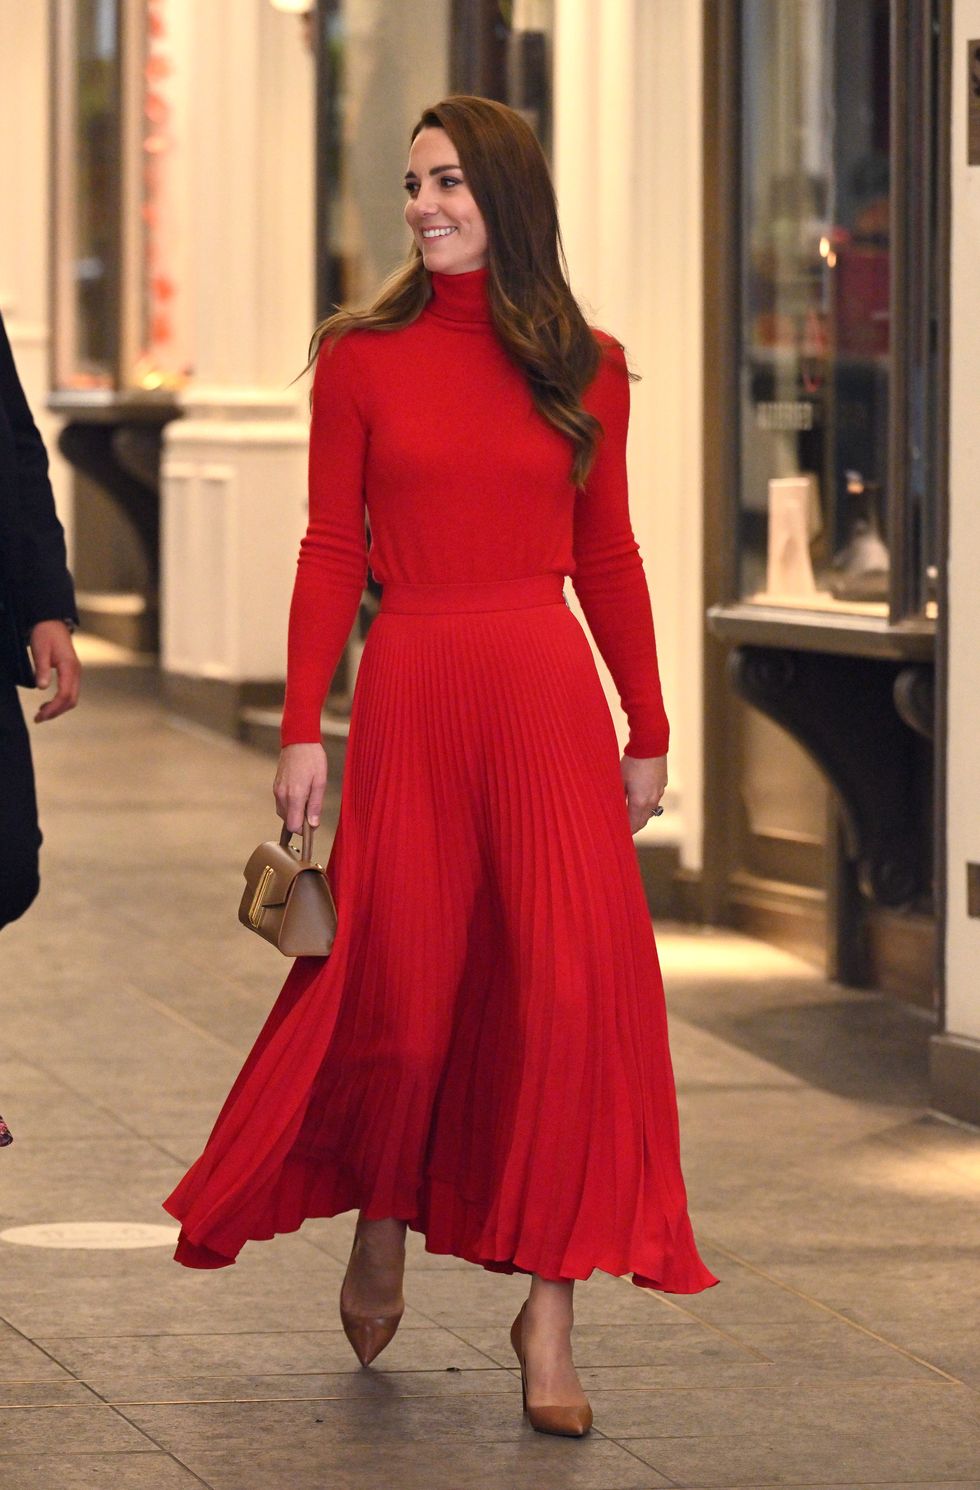 6 Turtleneck Dress Lookalikes for Kate Middleton's Fall Outfit